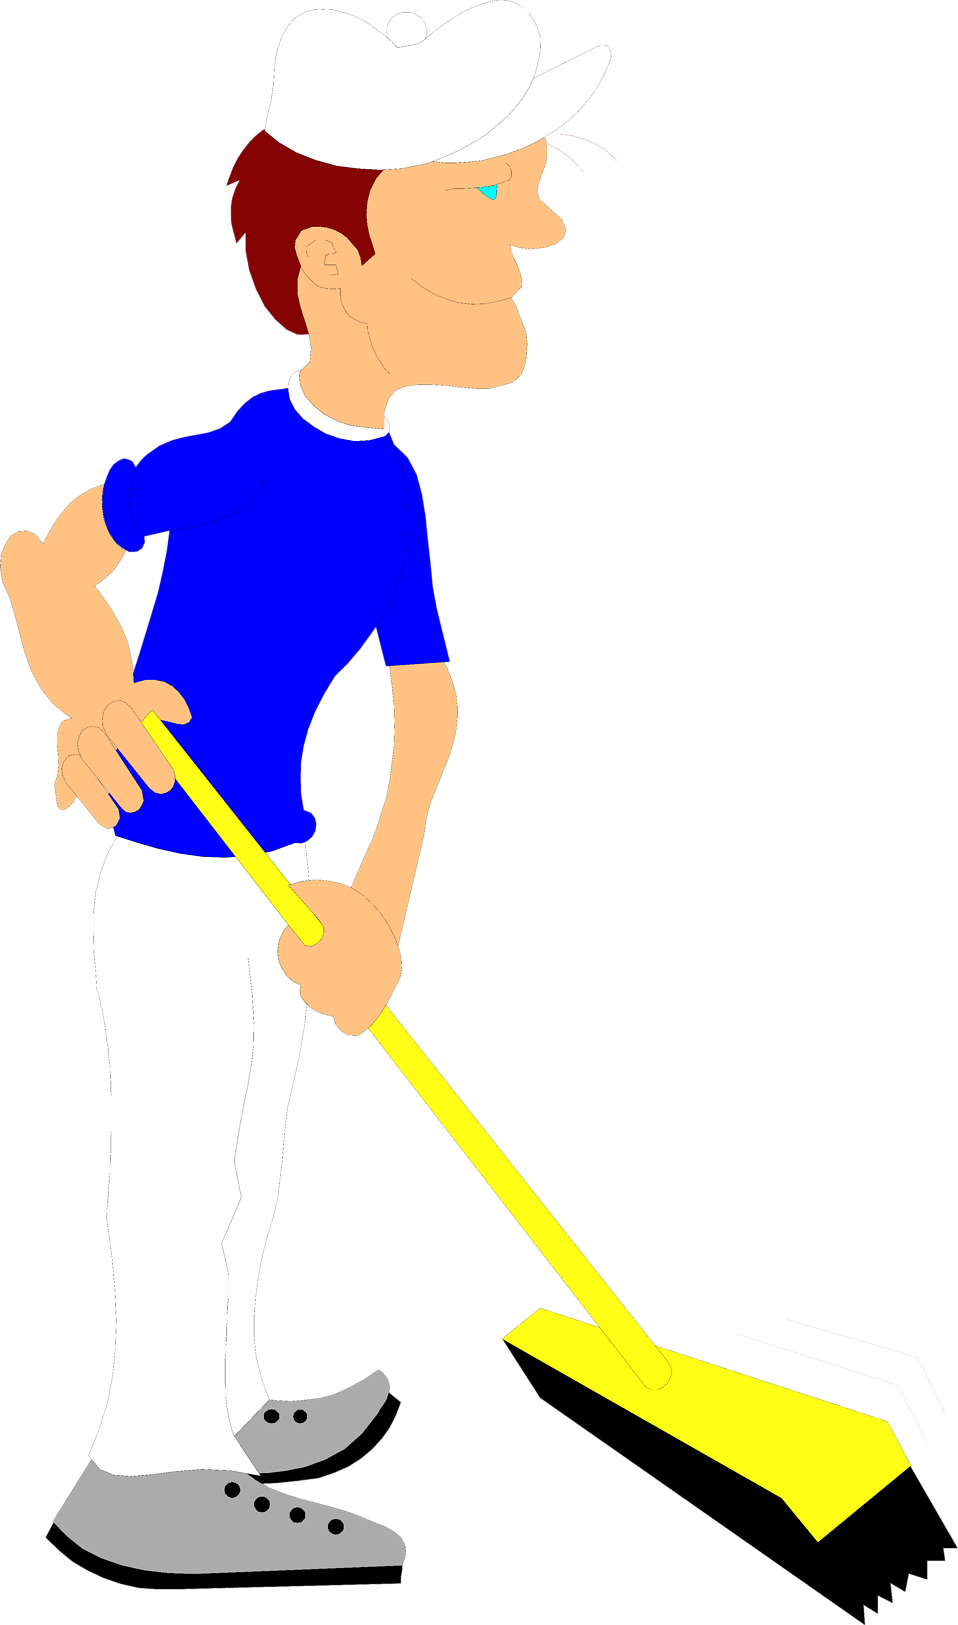 Janitor Cleaning With Broom Vector Illustration PNG